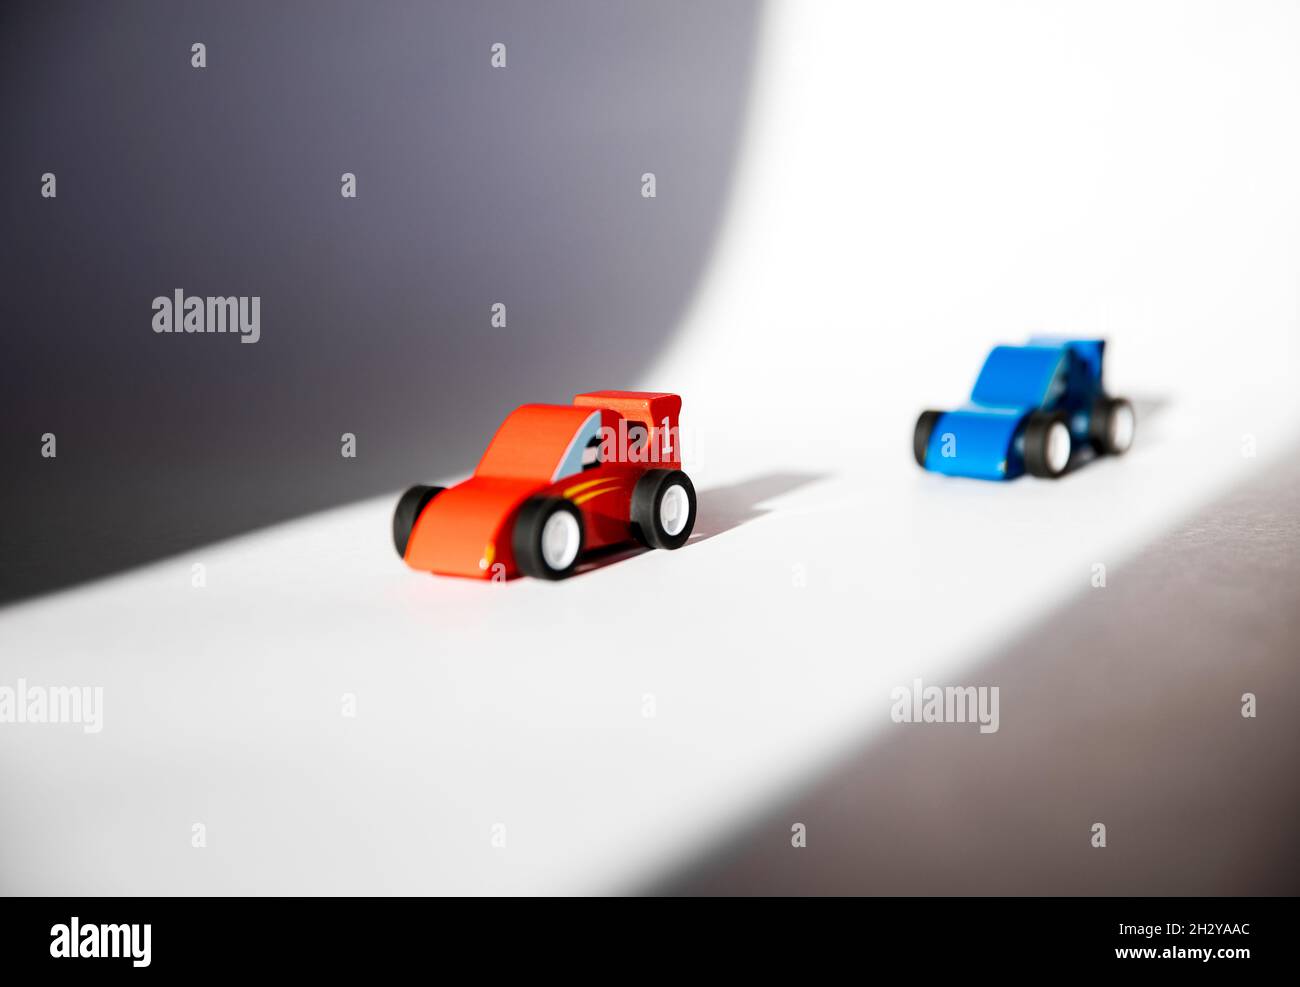 Red and blue wooden toy cars with numbers 1 and 2. Stock Photo